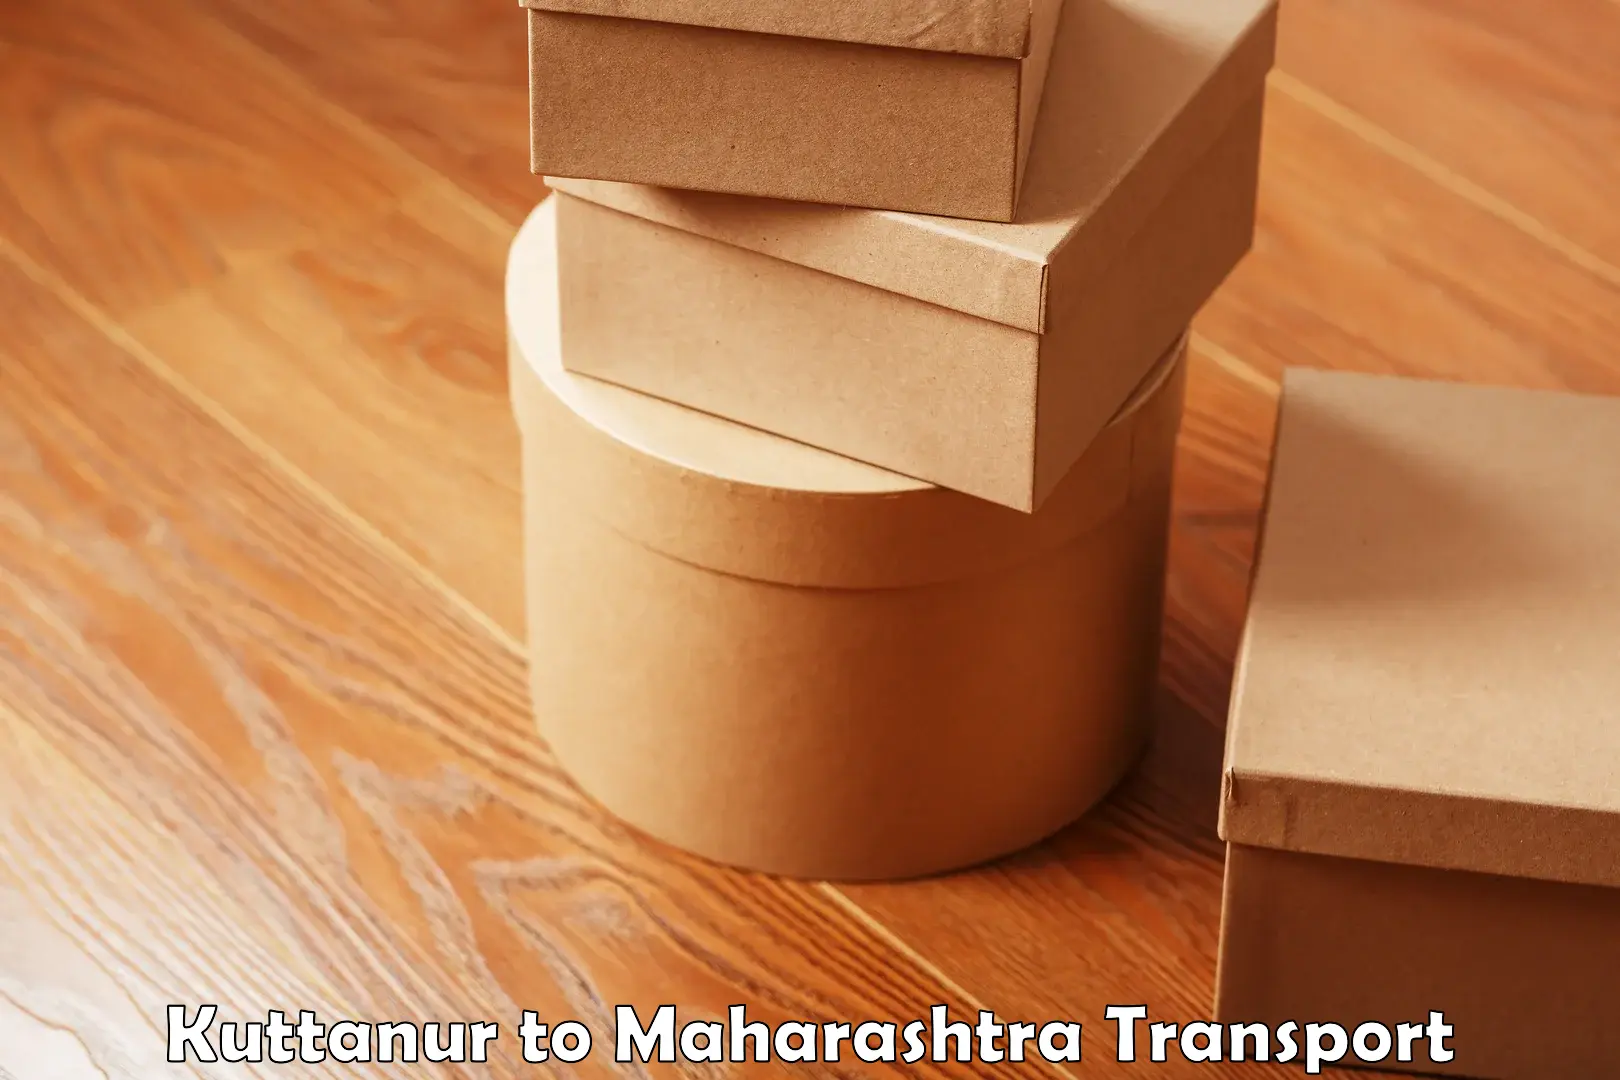 Lorry transport service in Kuttanur to Maharashtra